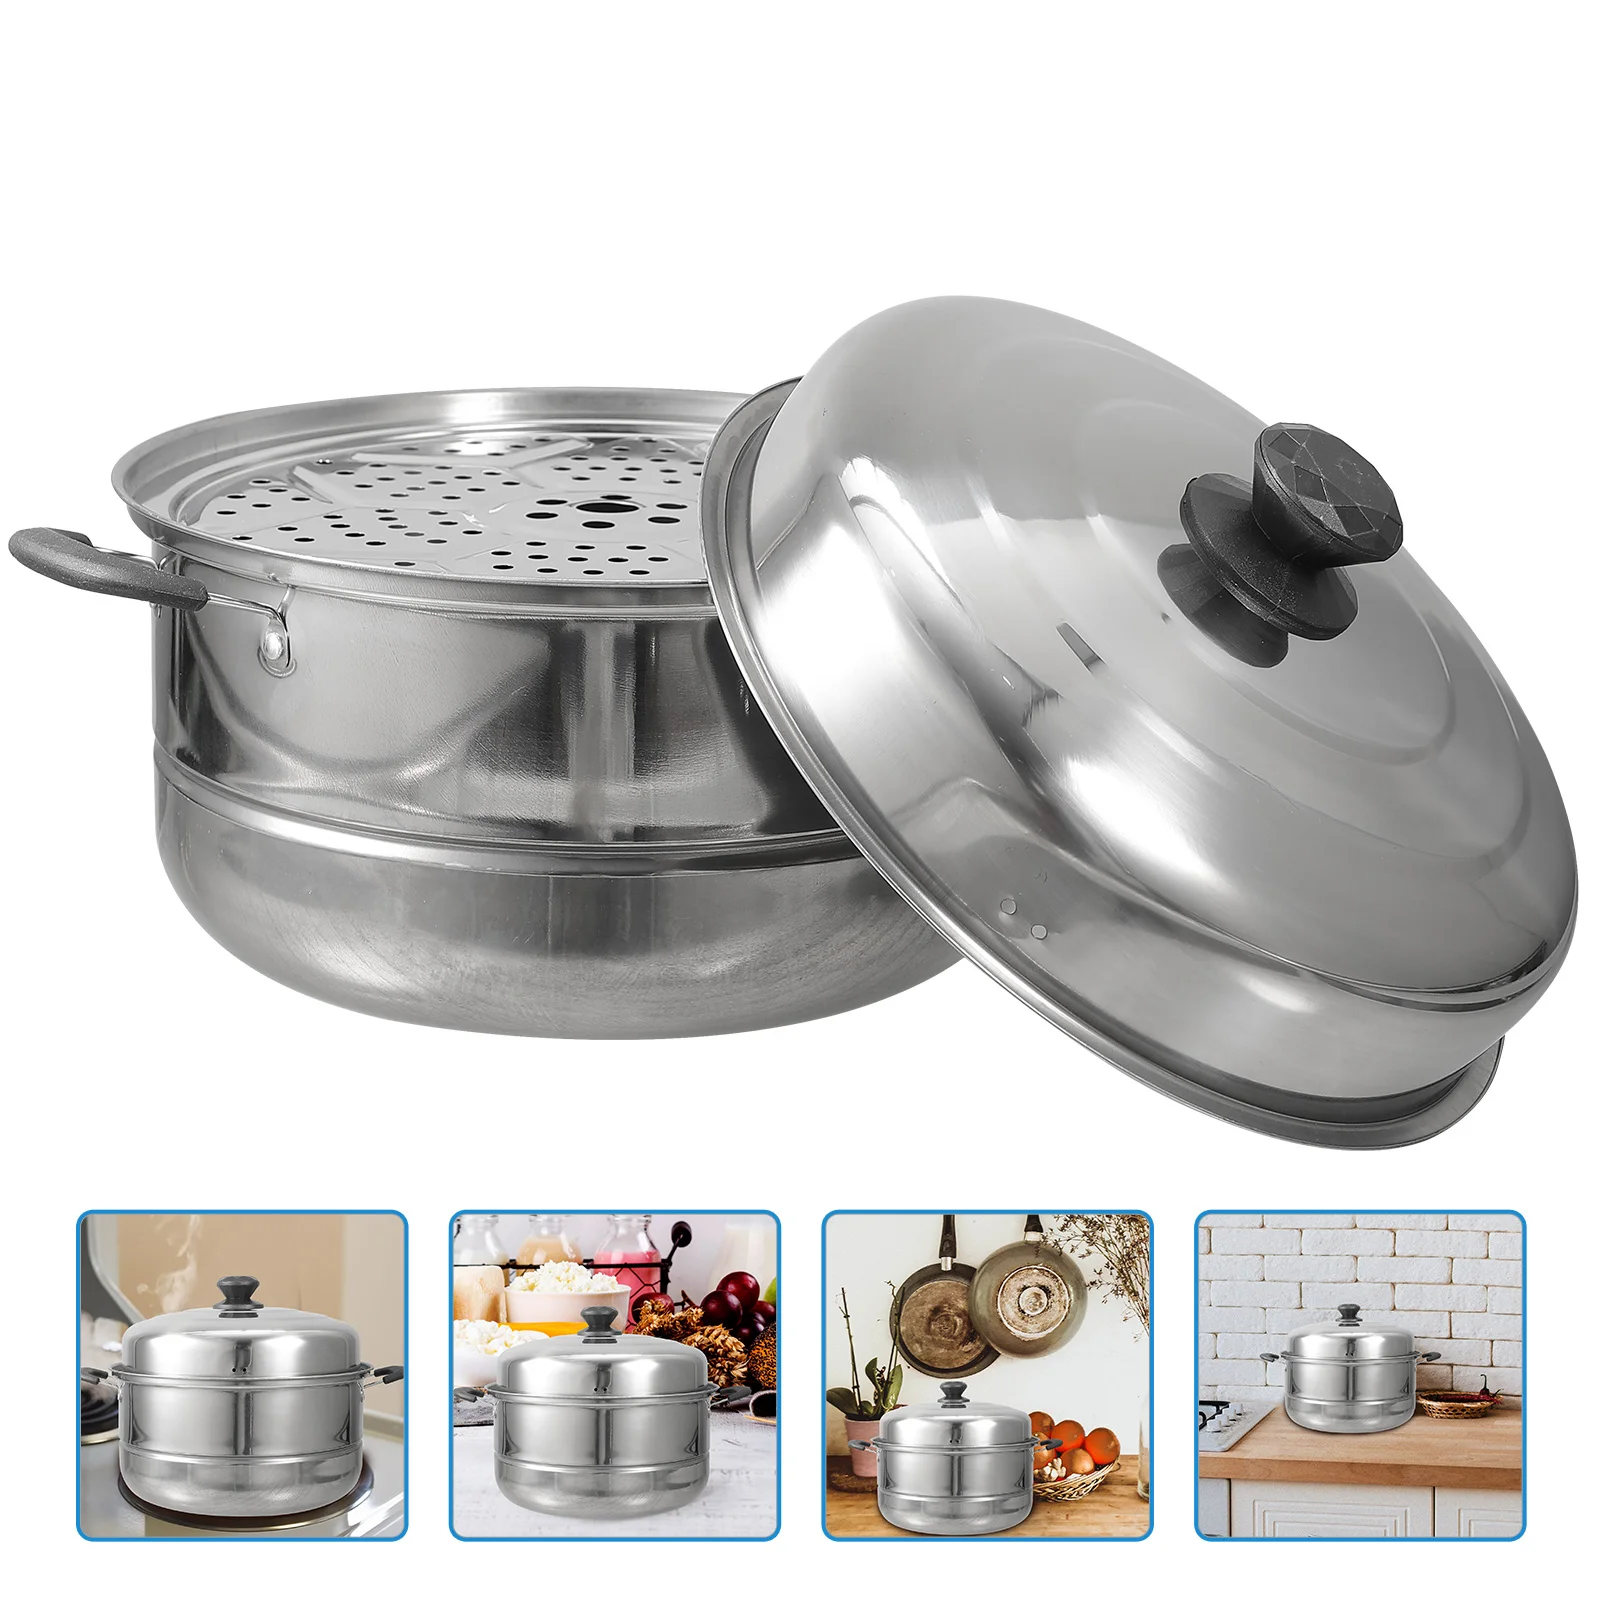 

Stainless Steel Stockpot Steam Pot Double Layers Steaming Pot Stockpot Soup Pot with Steel Lids Kitchen Cookwares- 30cm